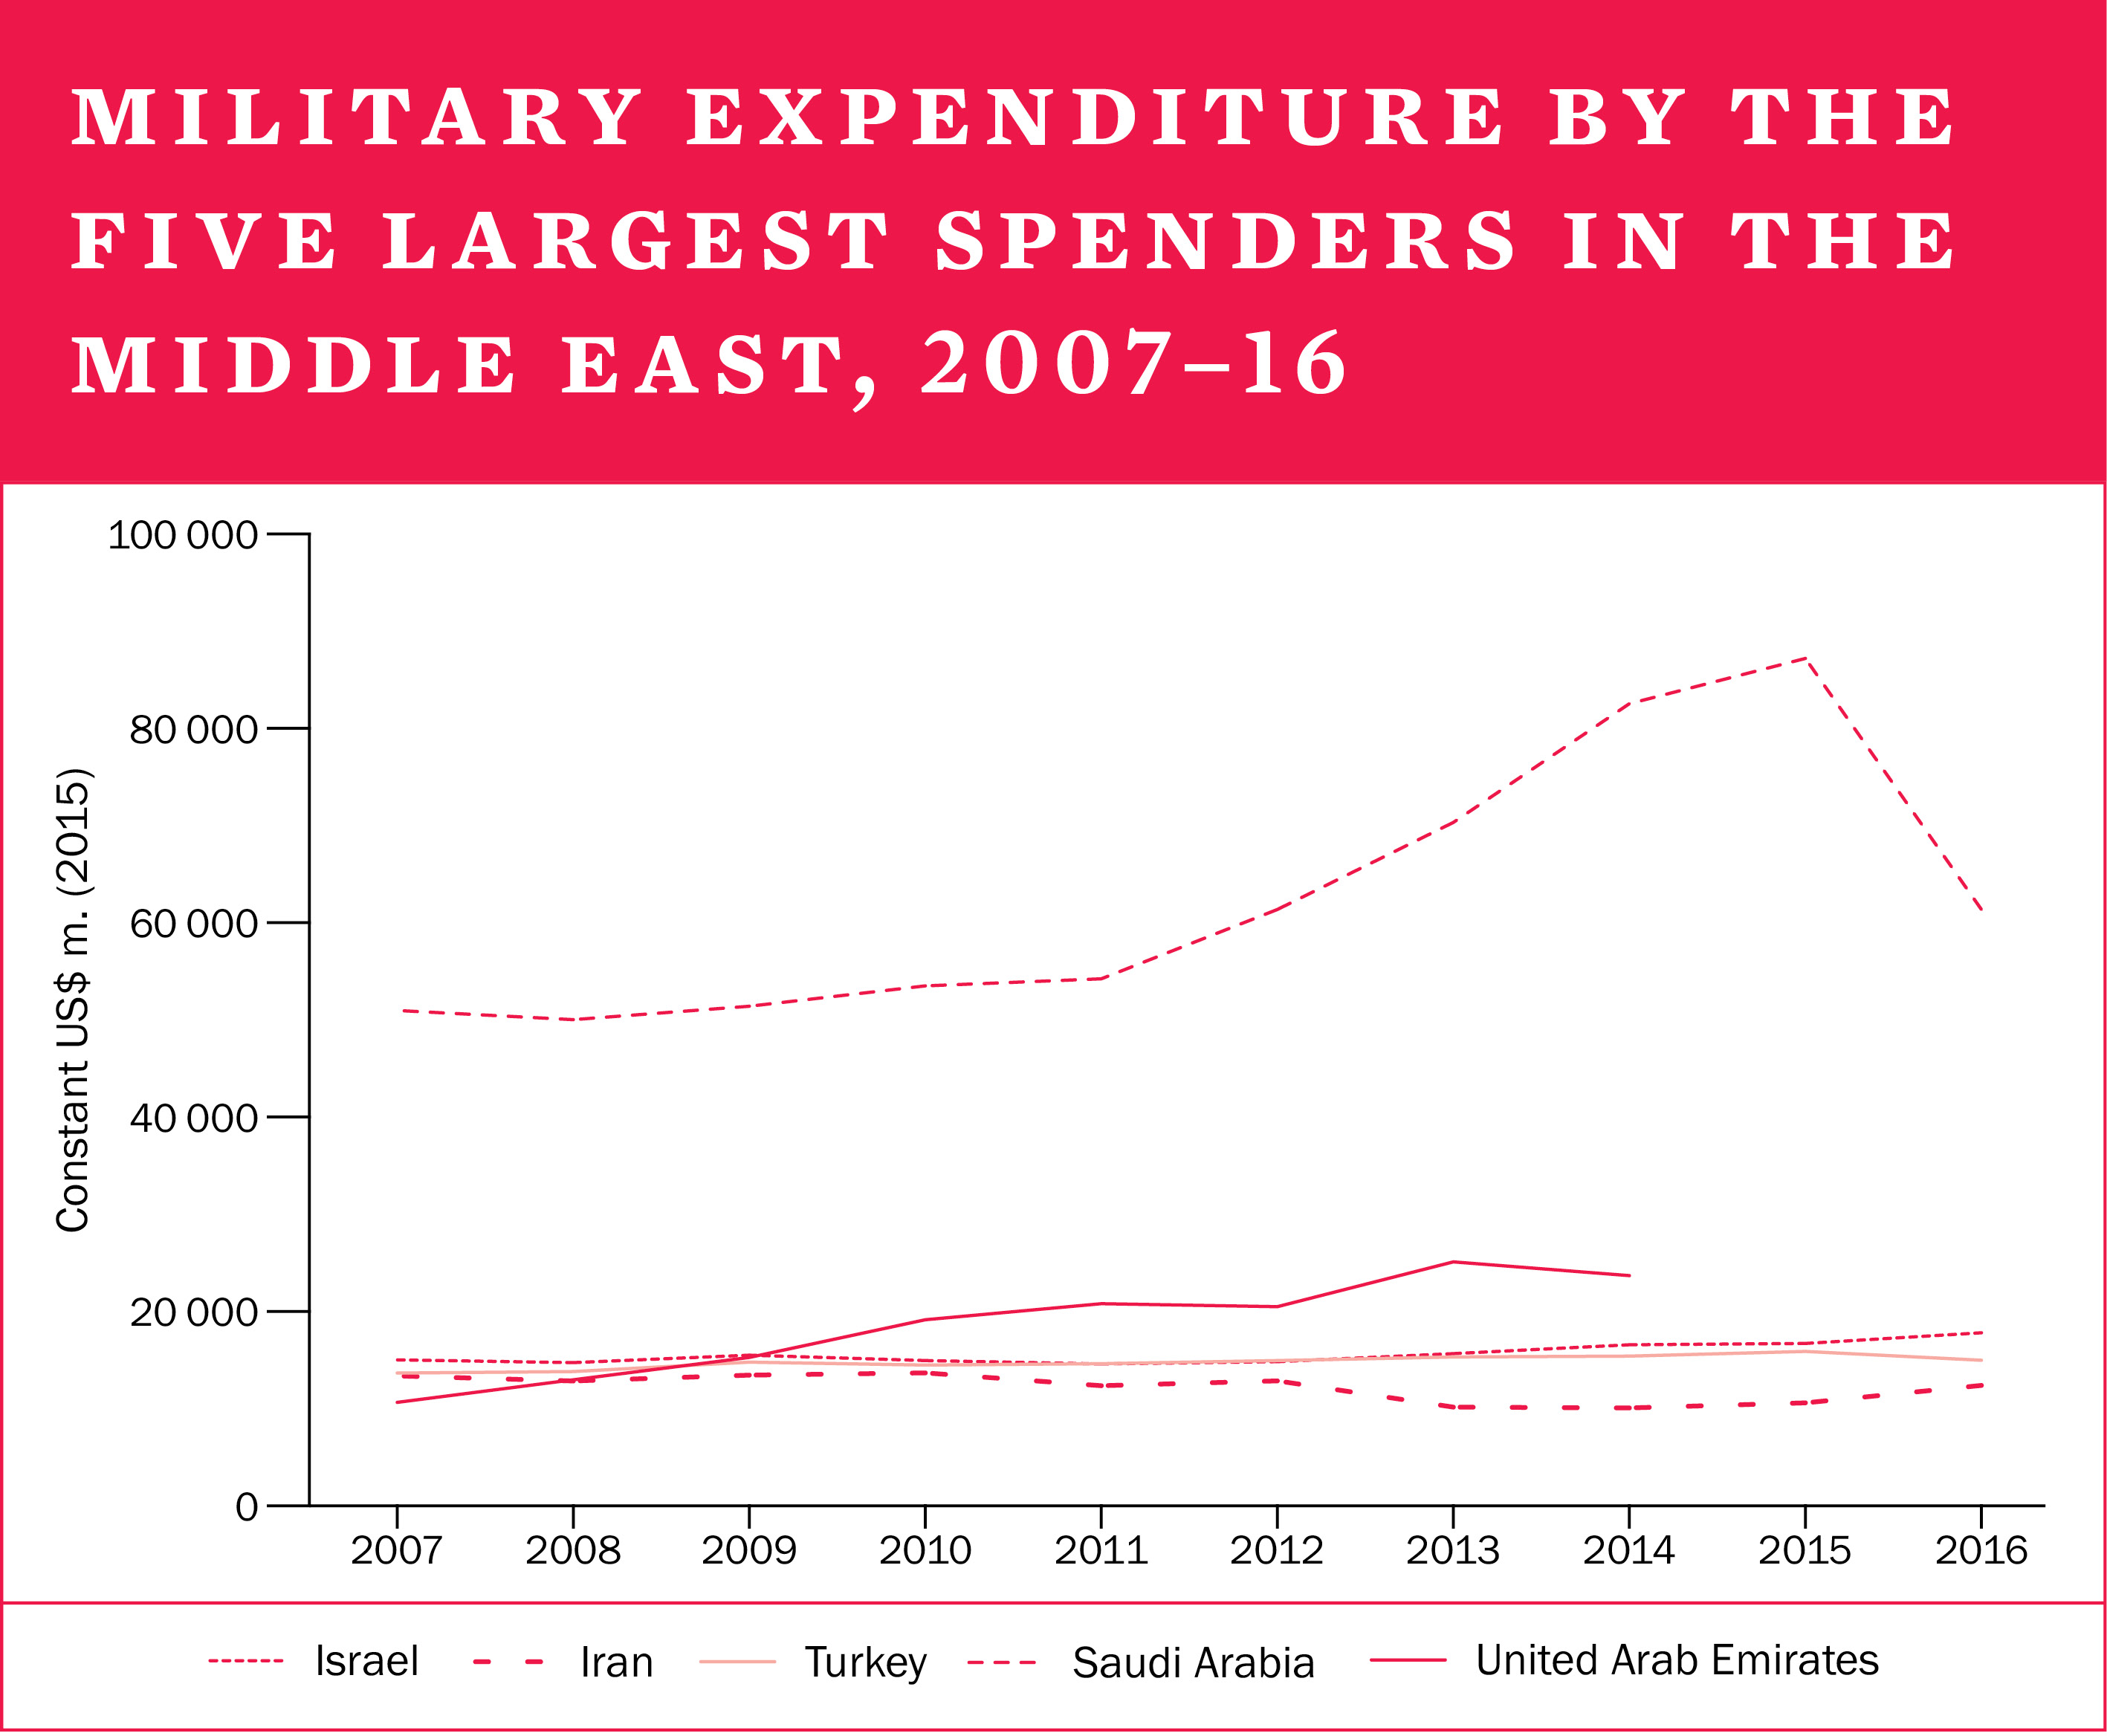 Military expenditure by the five largest spenders in the Middle East, 2007-16